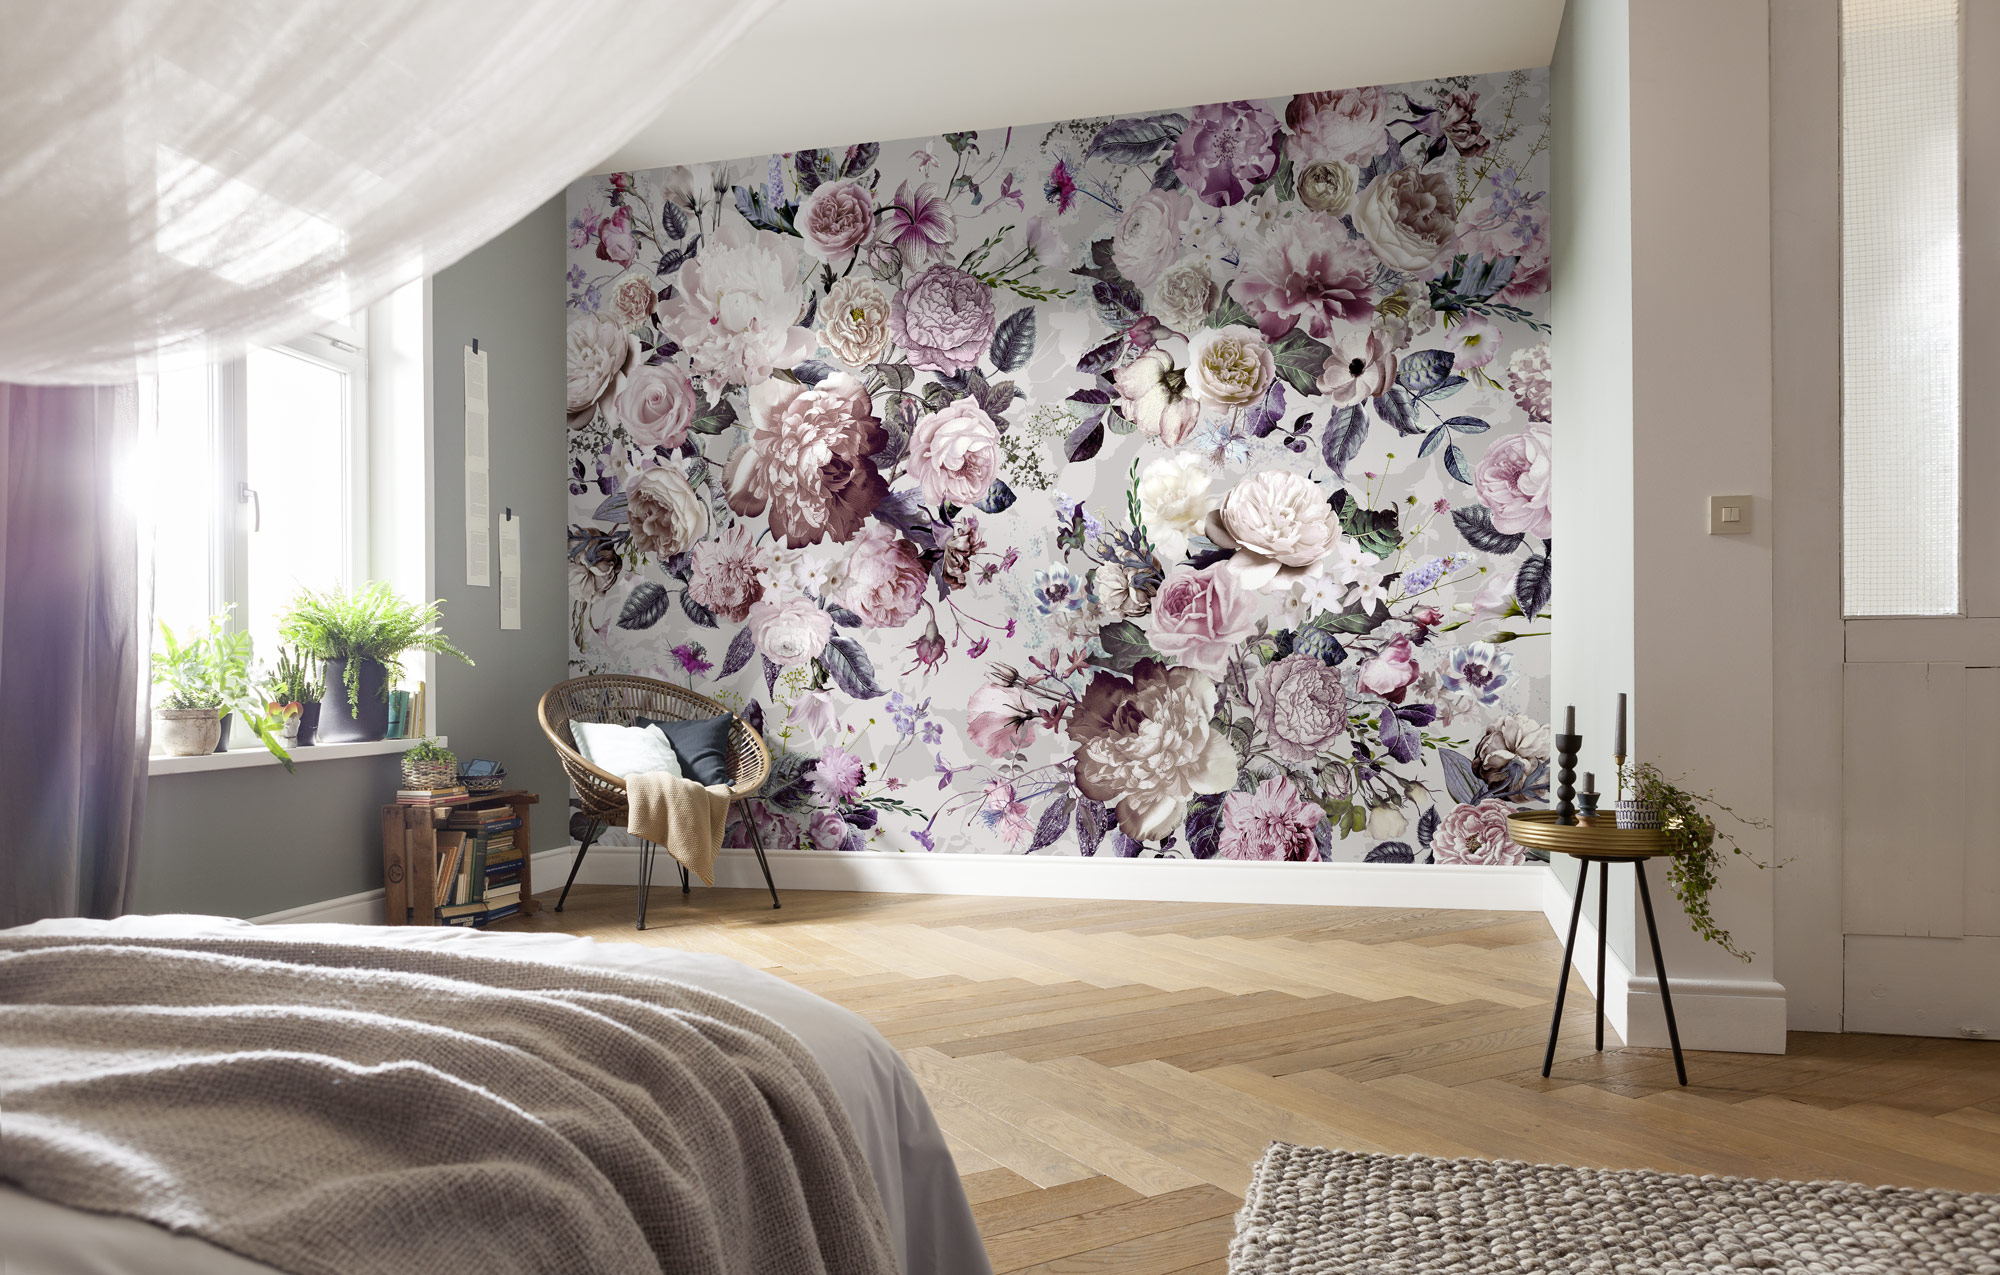 X7-1017_Lovely_Blossoms_Interieur_i_WEB